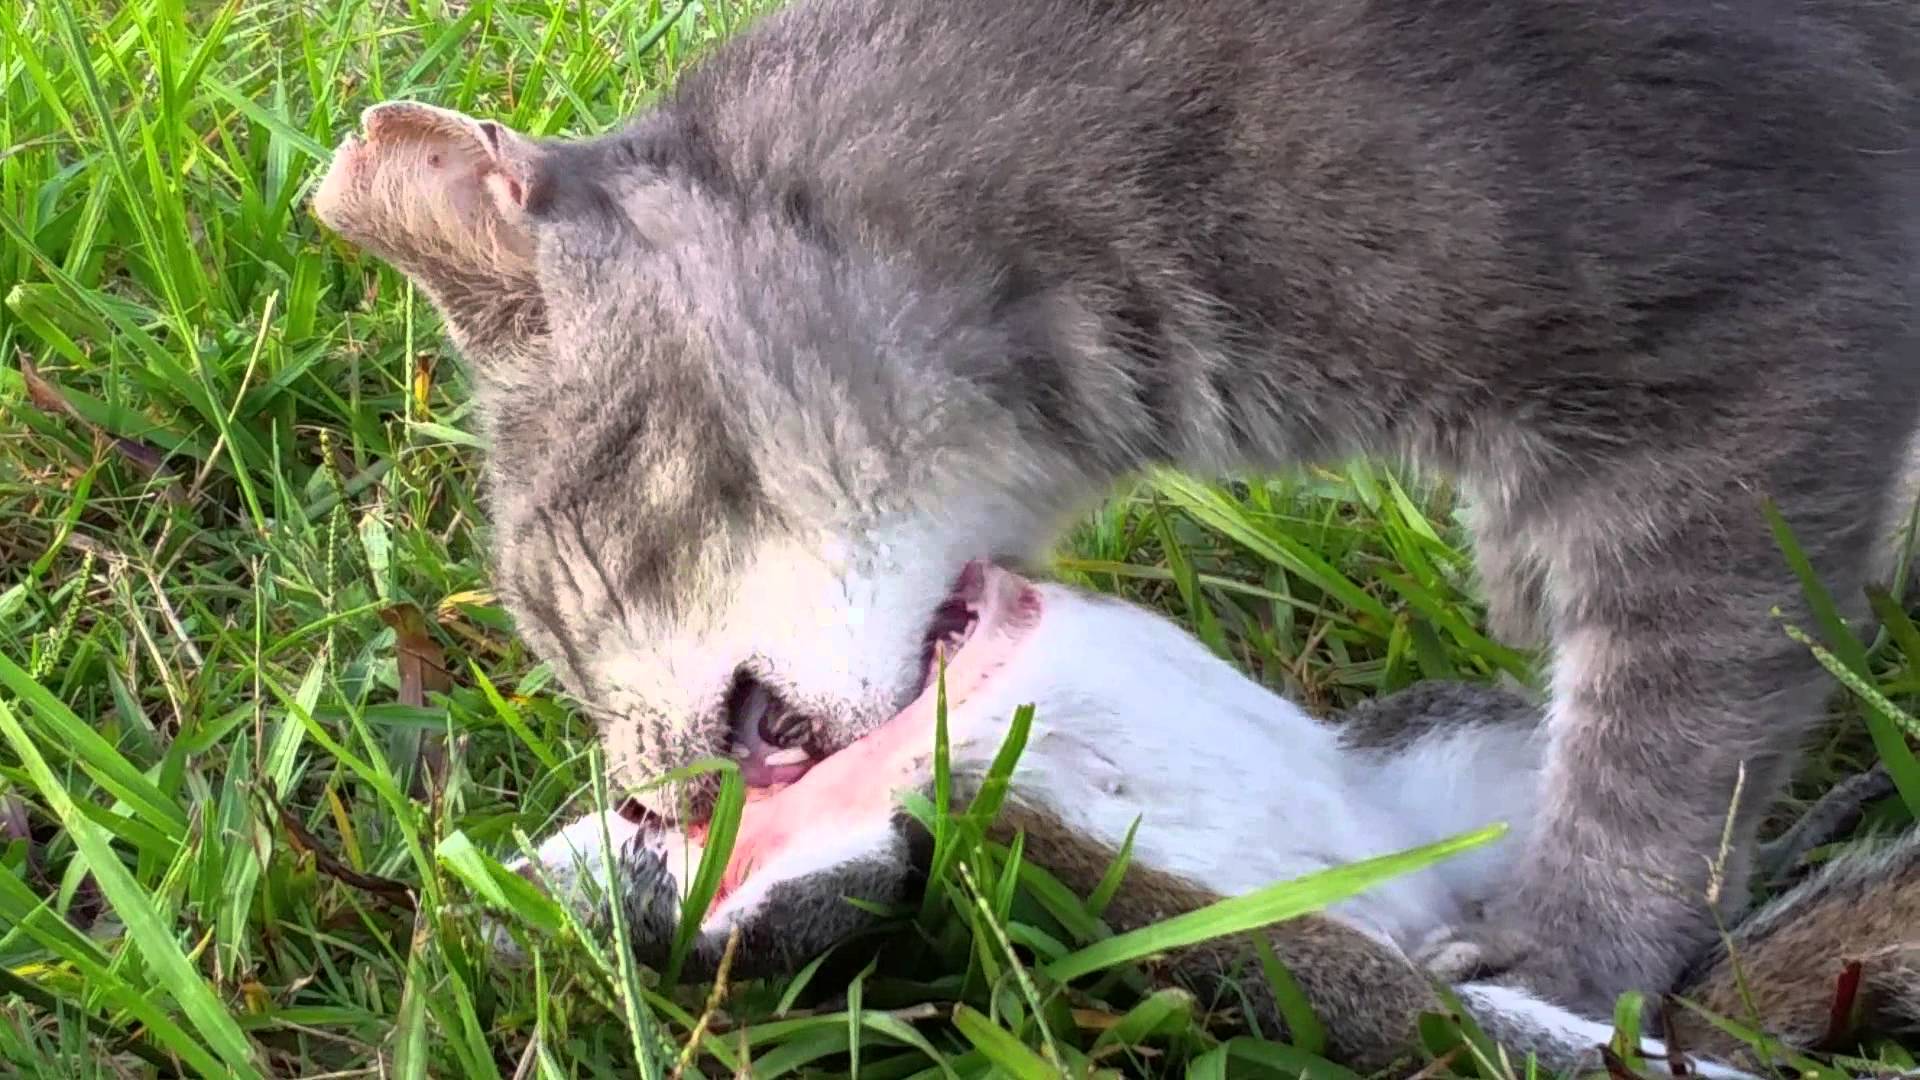 Cat eating squirrel - YouTube